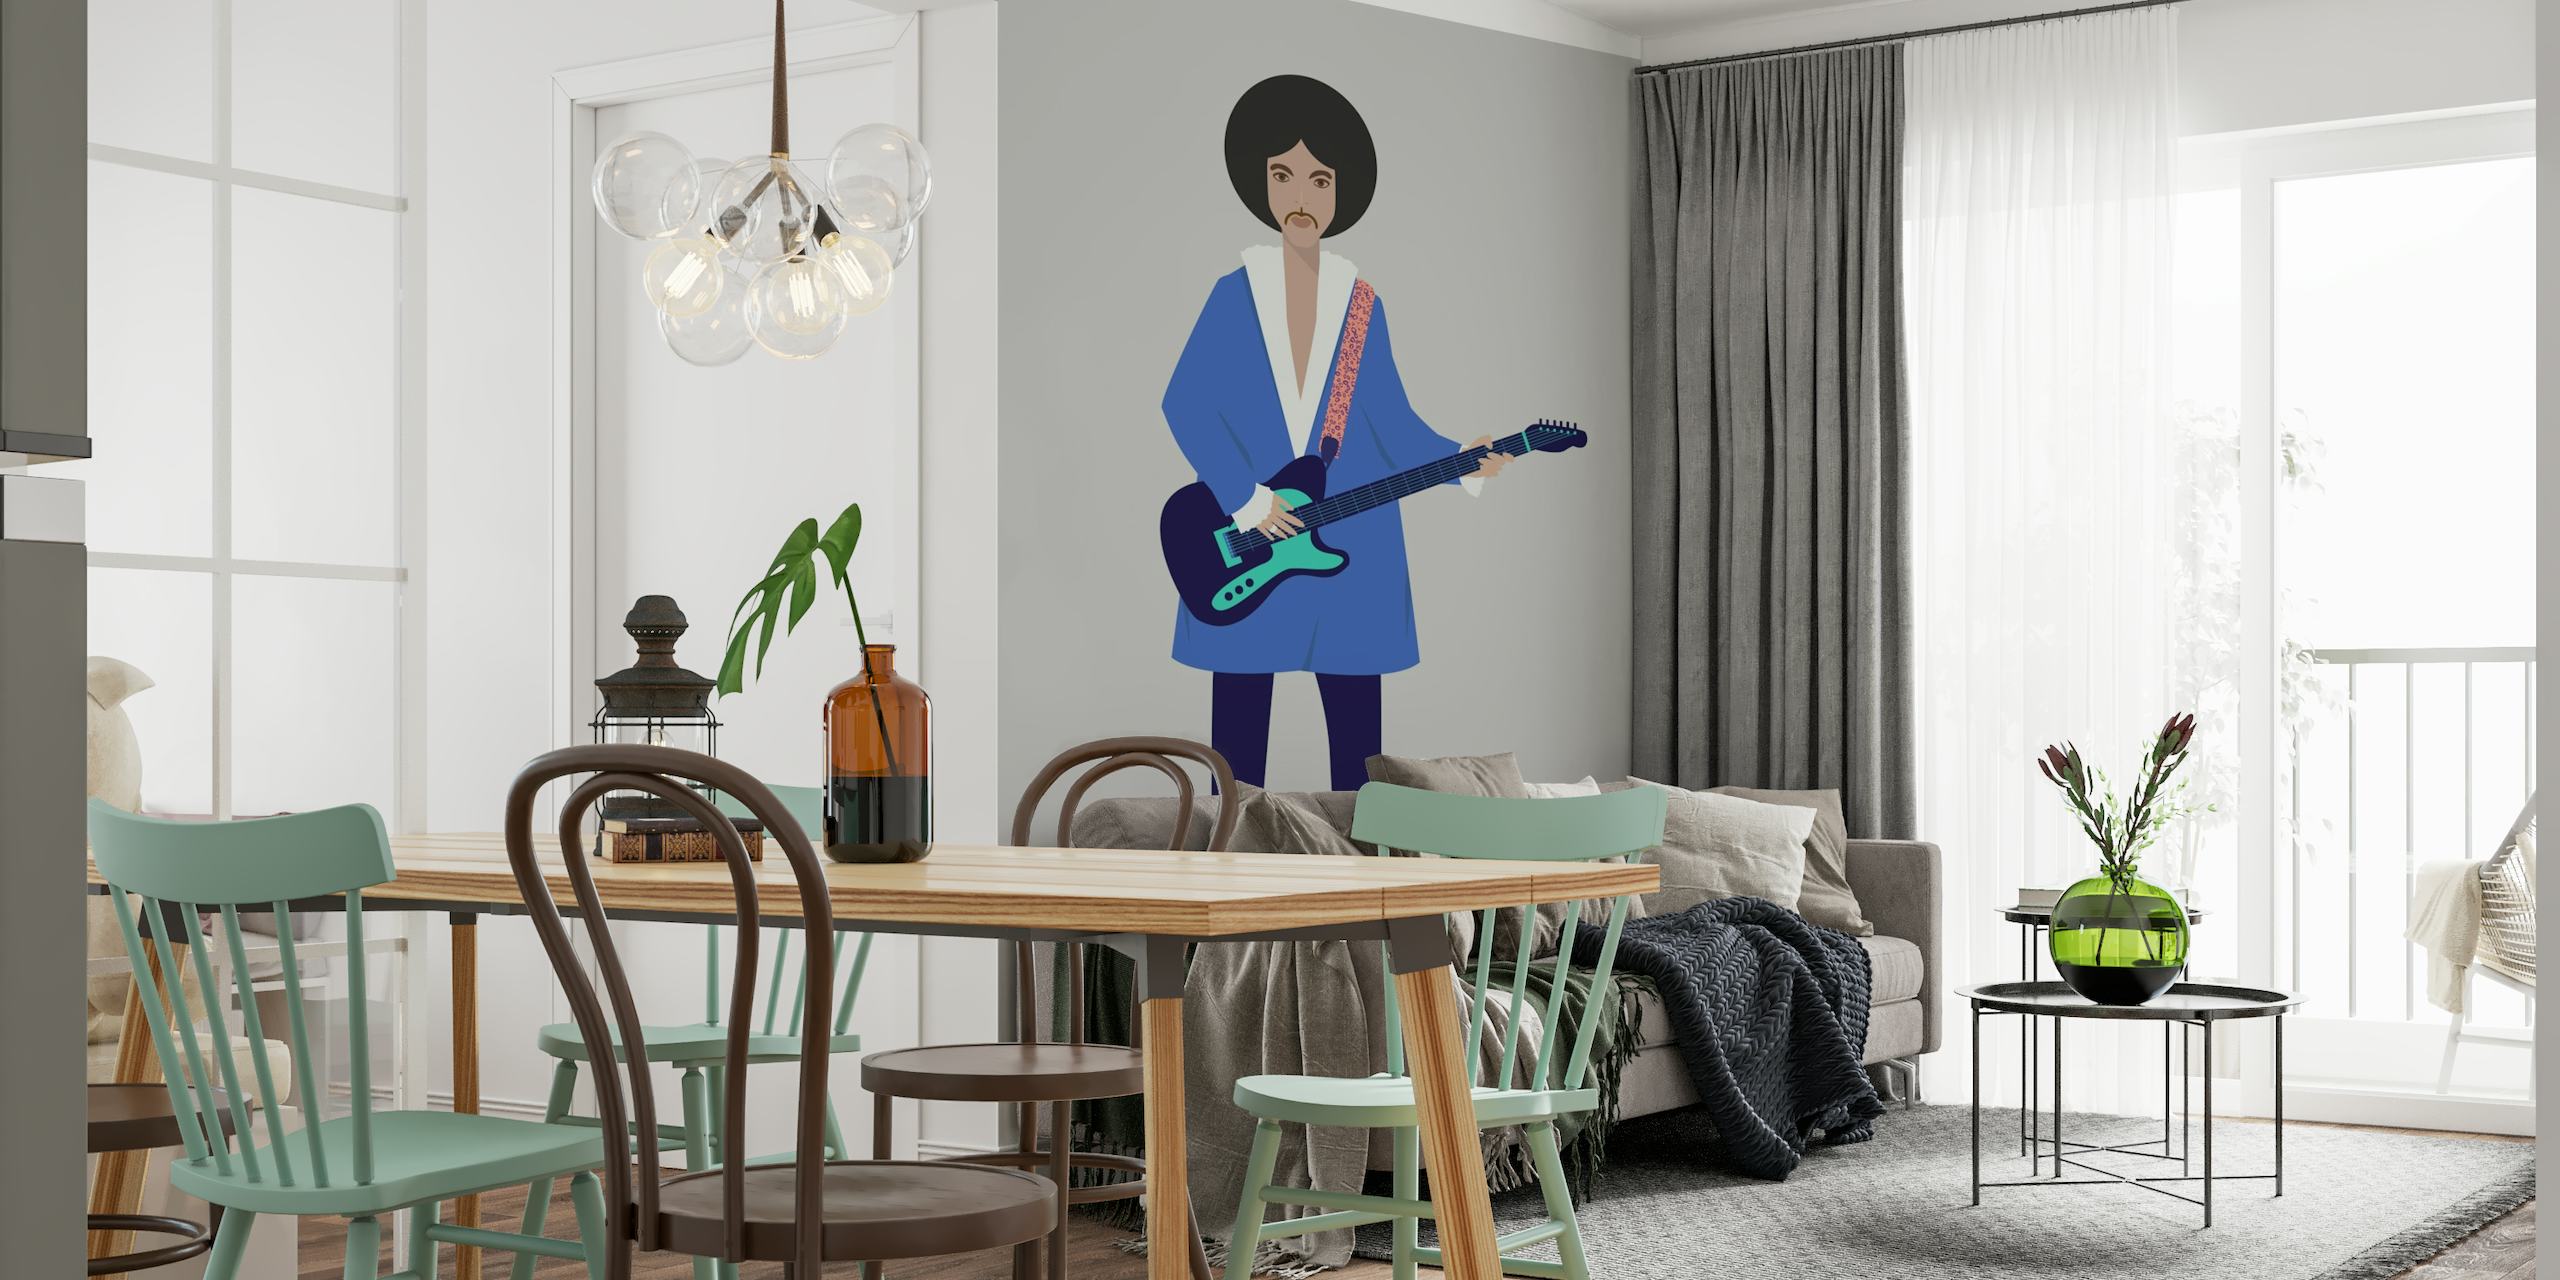 Illustrative wall mural of a person with a guitar, featuring a modern artistic design